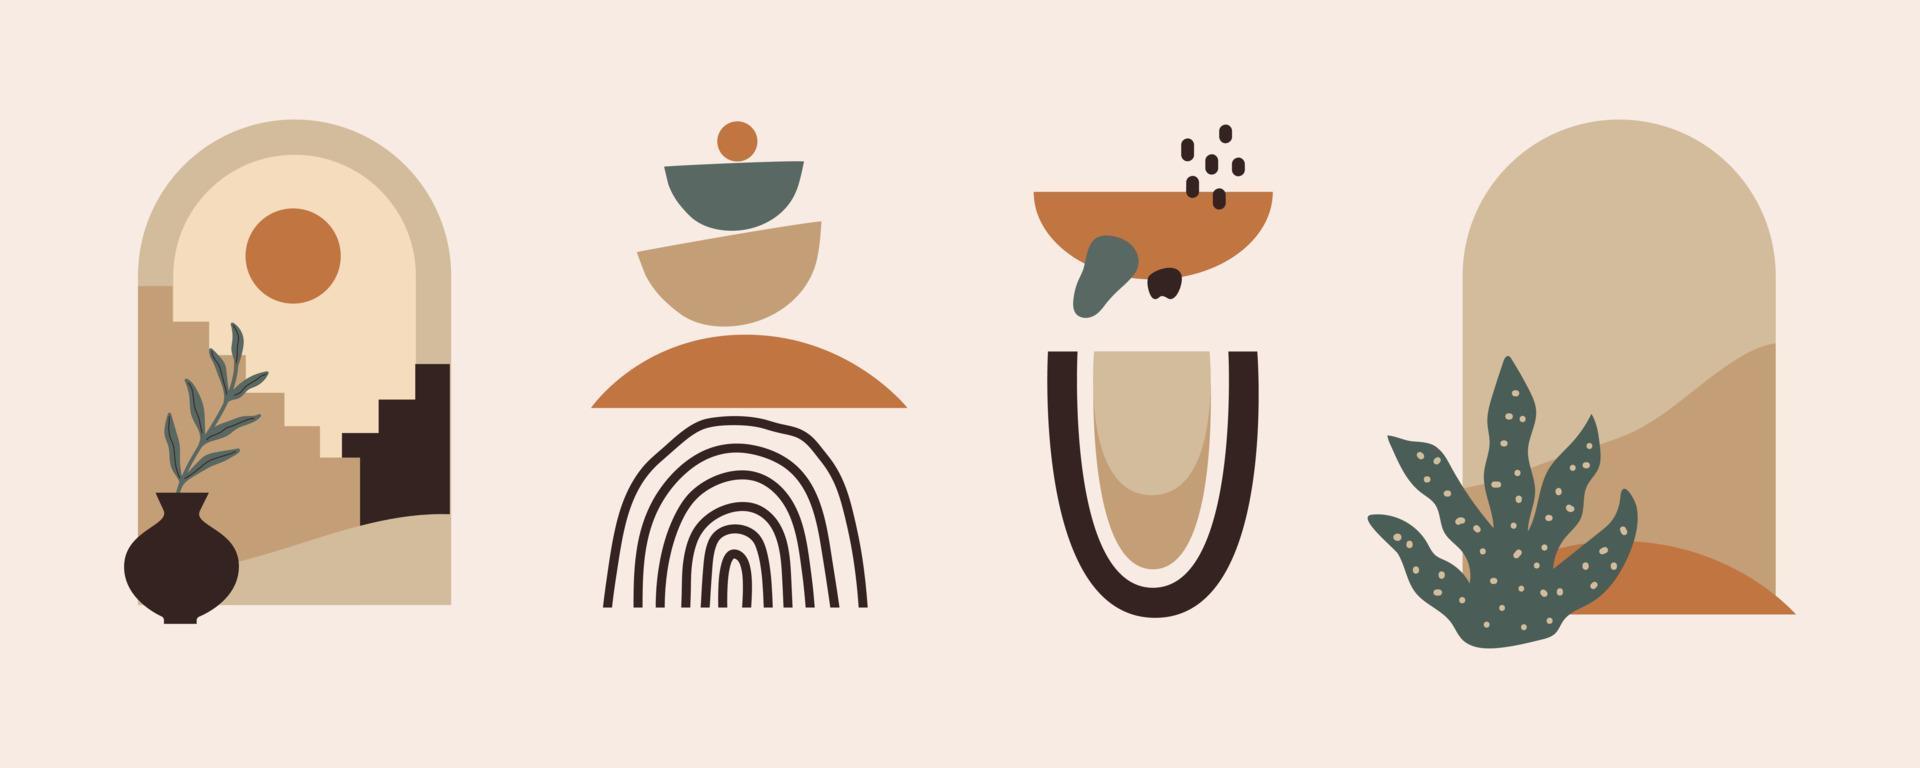 A collection of four abstract illustrations in earthy tones - Balance